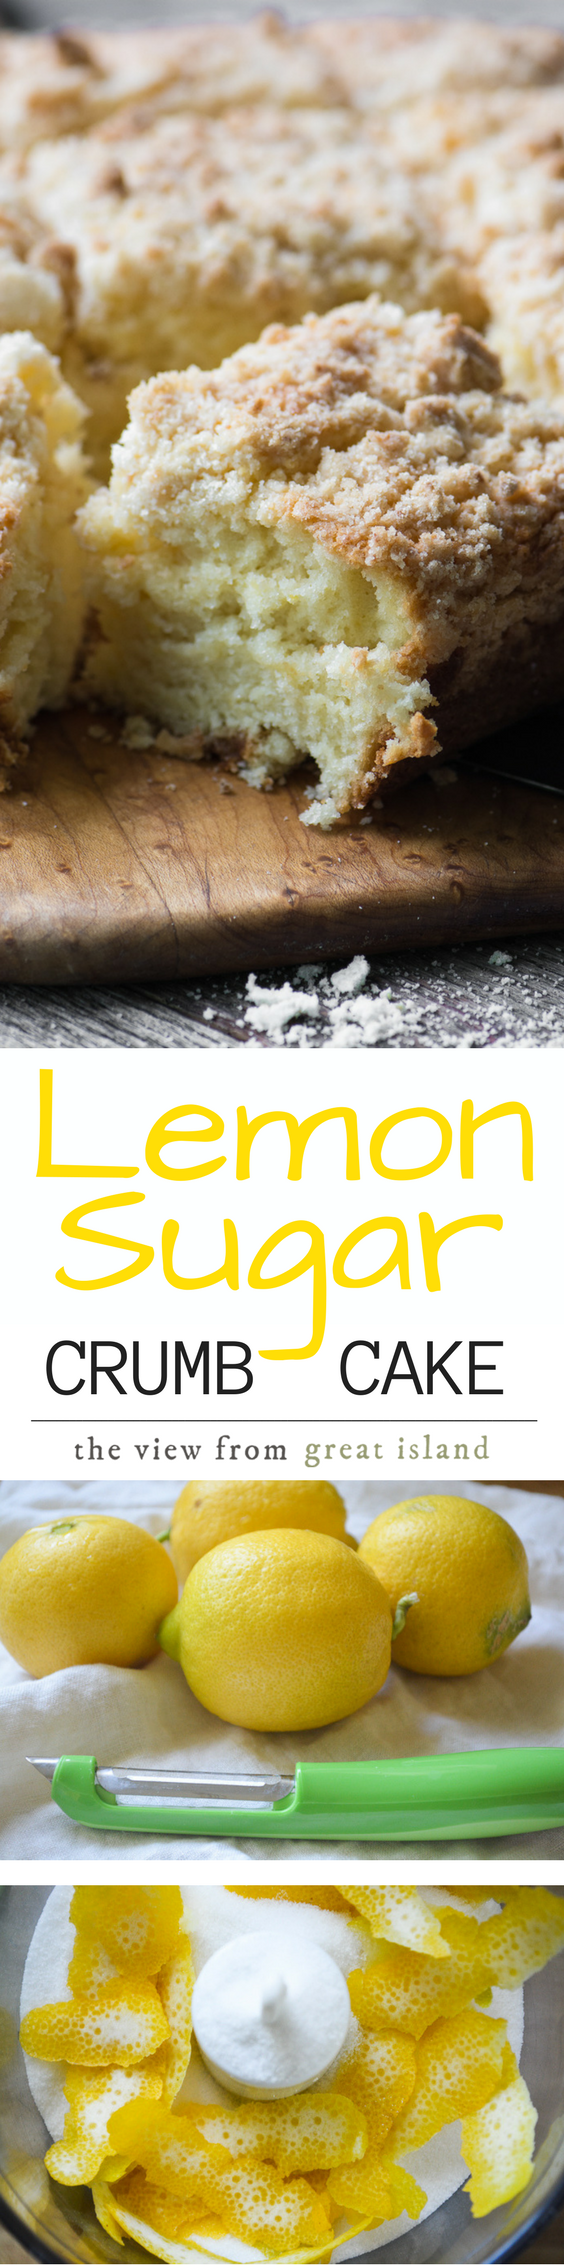 Lemon Sugar Crumb Cake is a mile high crumb cake with a delicate fresh lemon flavor, it’s made with my special lemon infused sugar